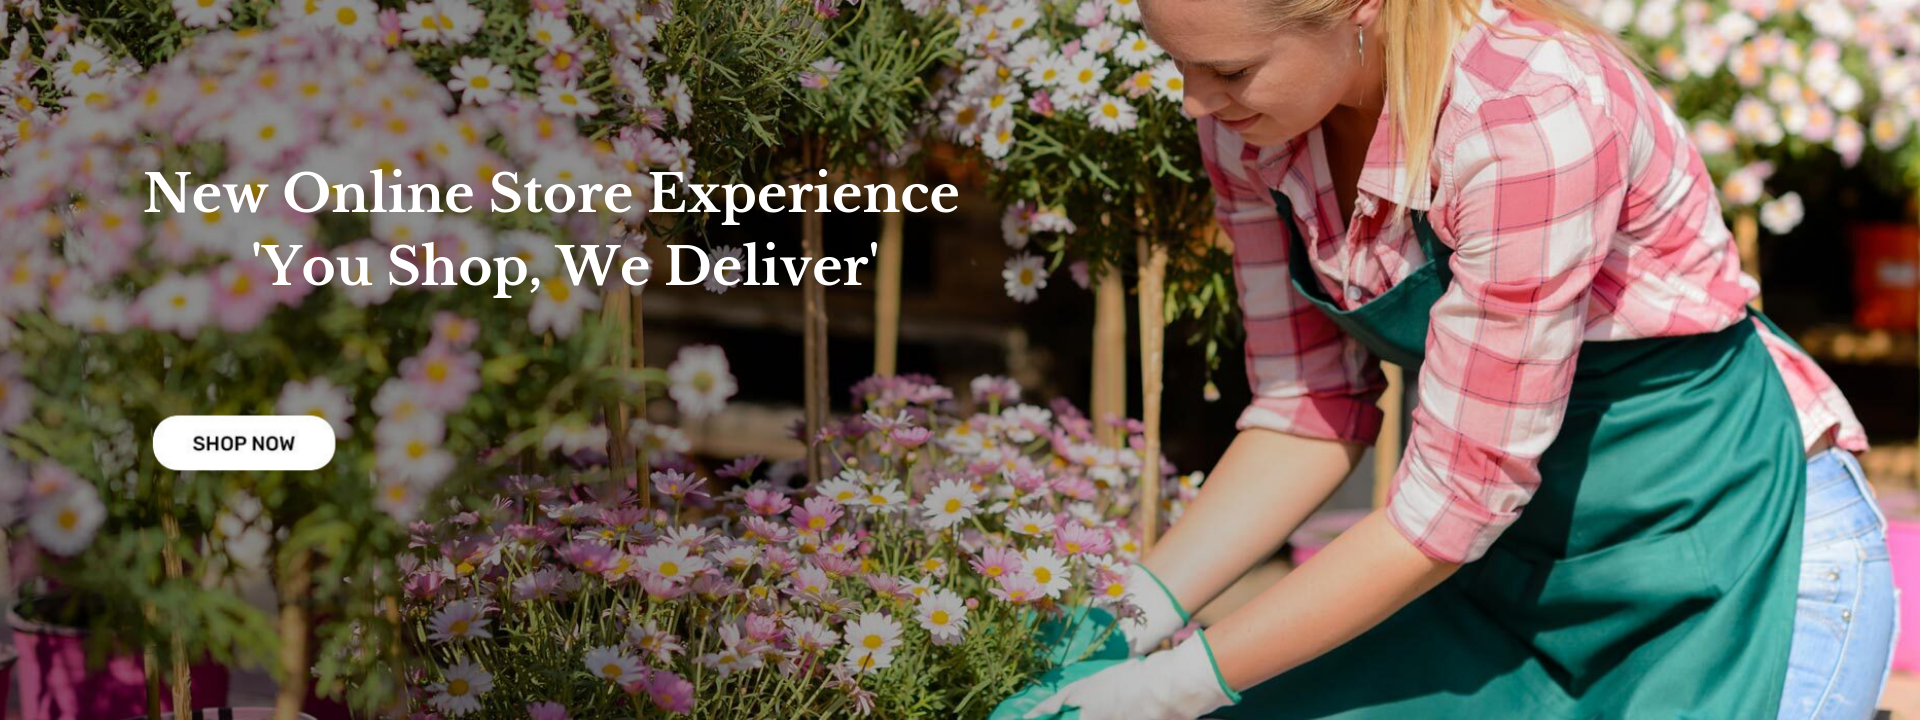 New Online Store Experience 'You Shop, We Deliver' Free Delivery On All Orders